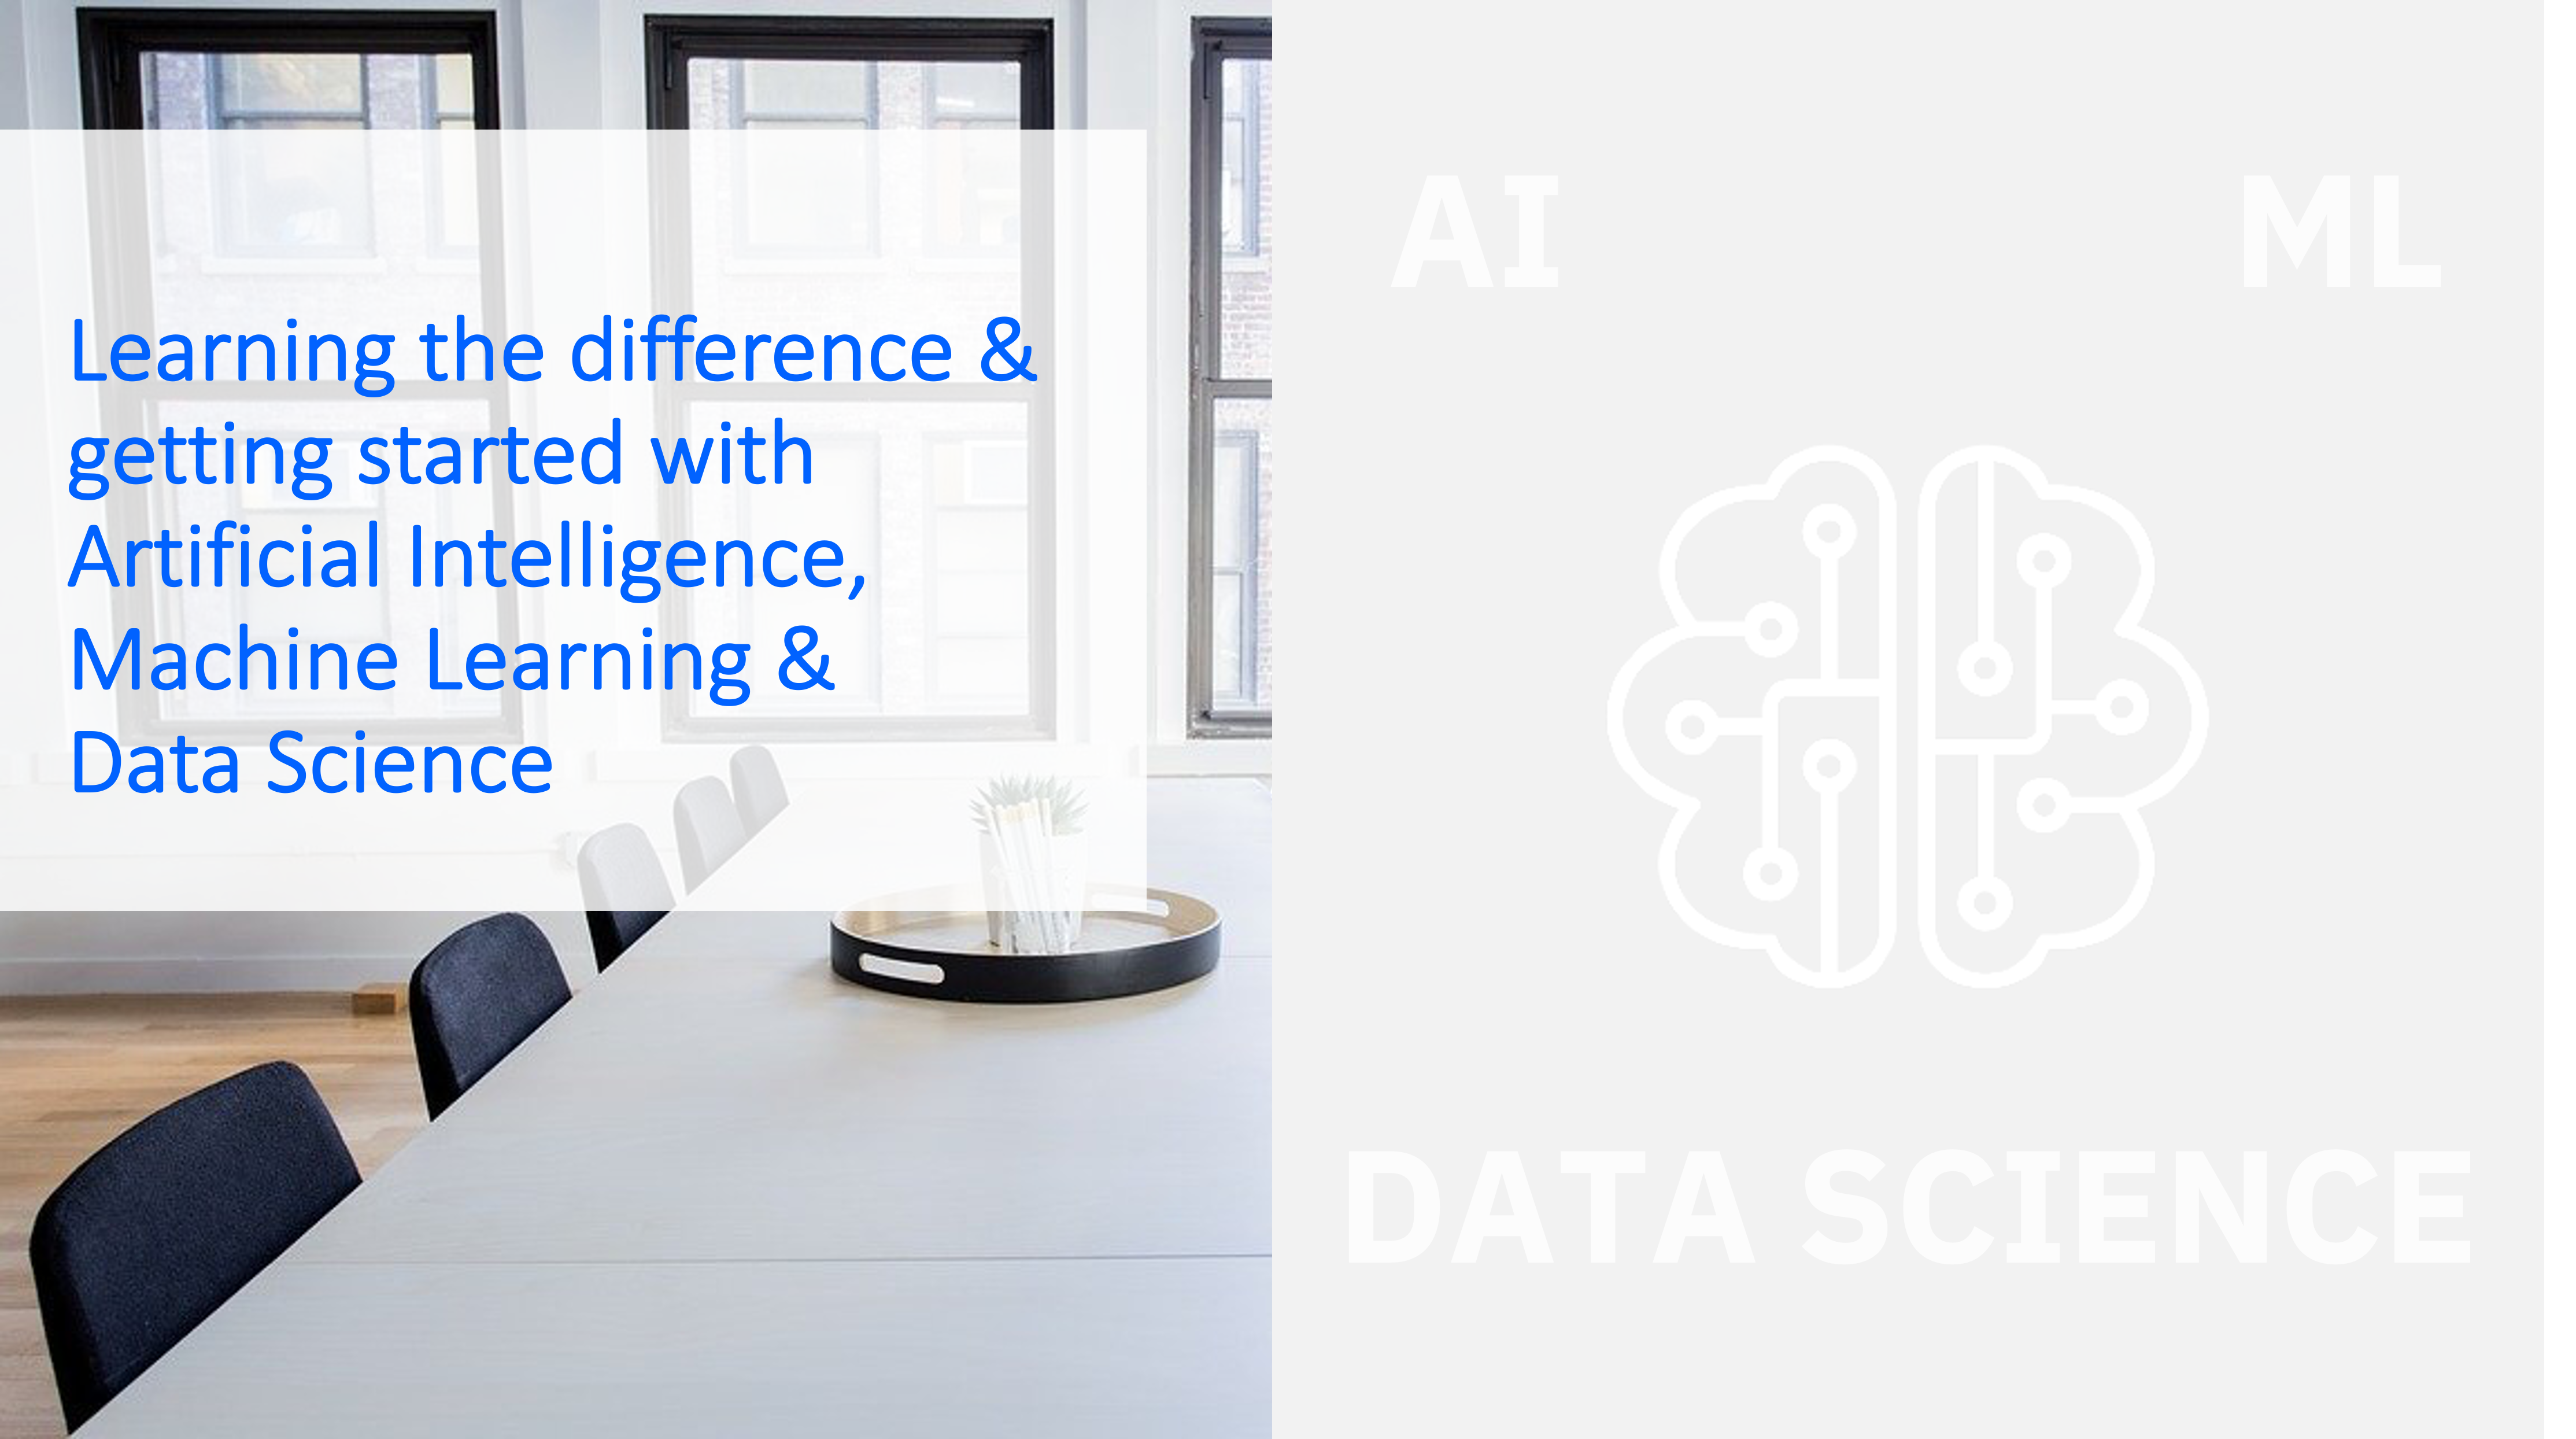 learning-difference-getting-started-artificial-intelligence-machine-learning-data-science